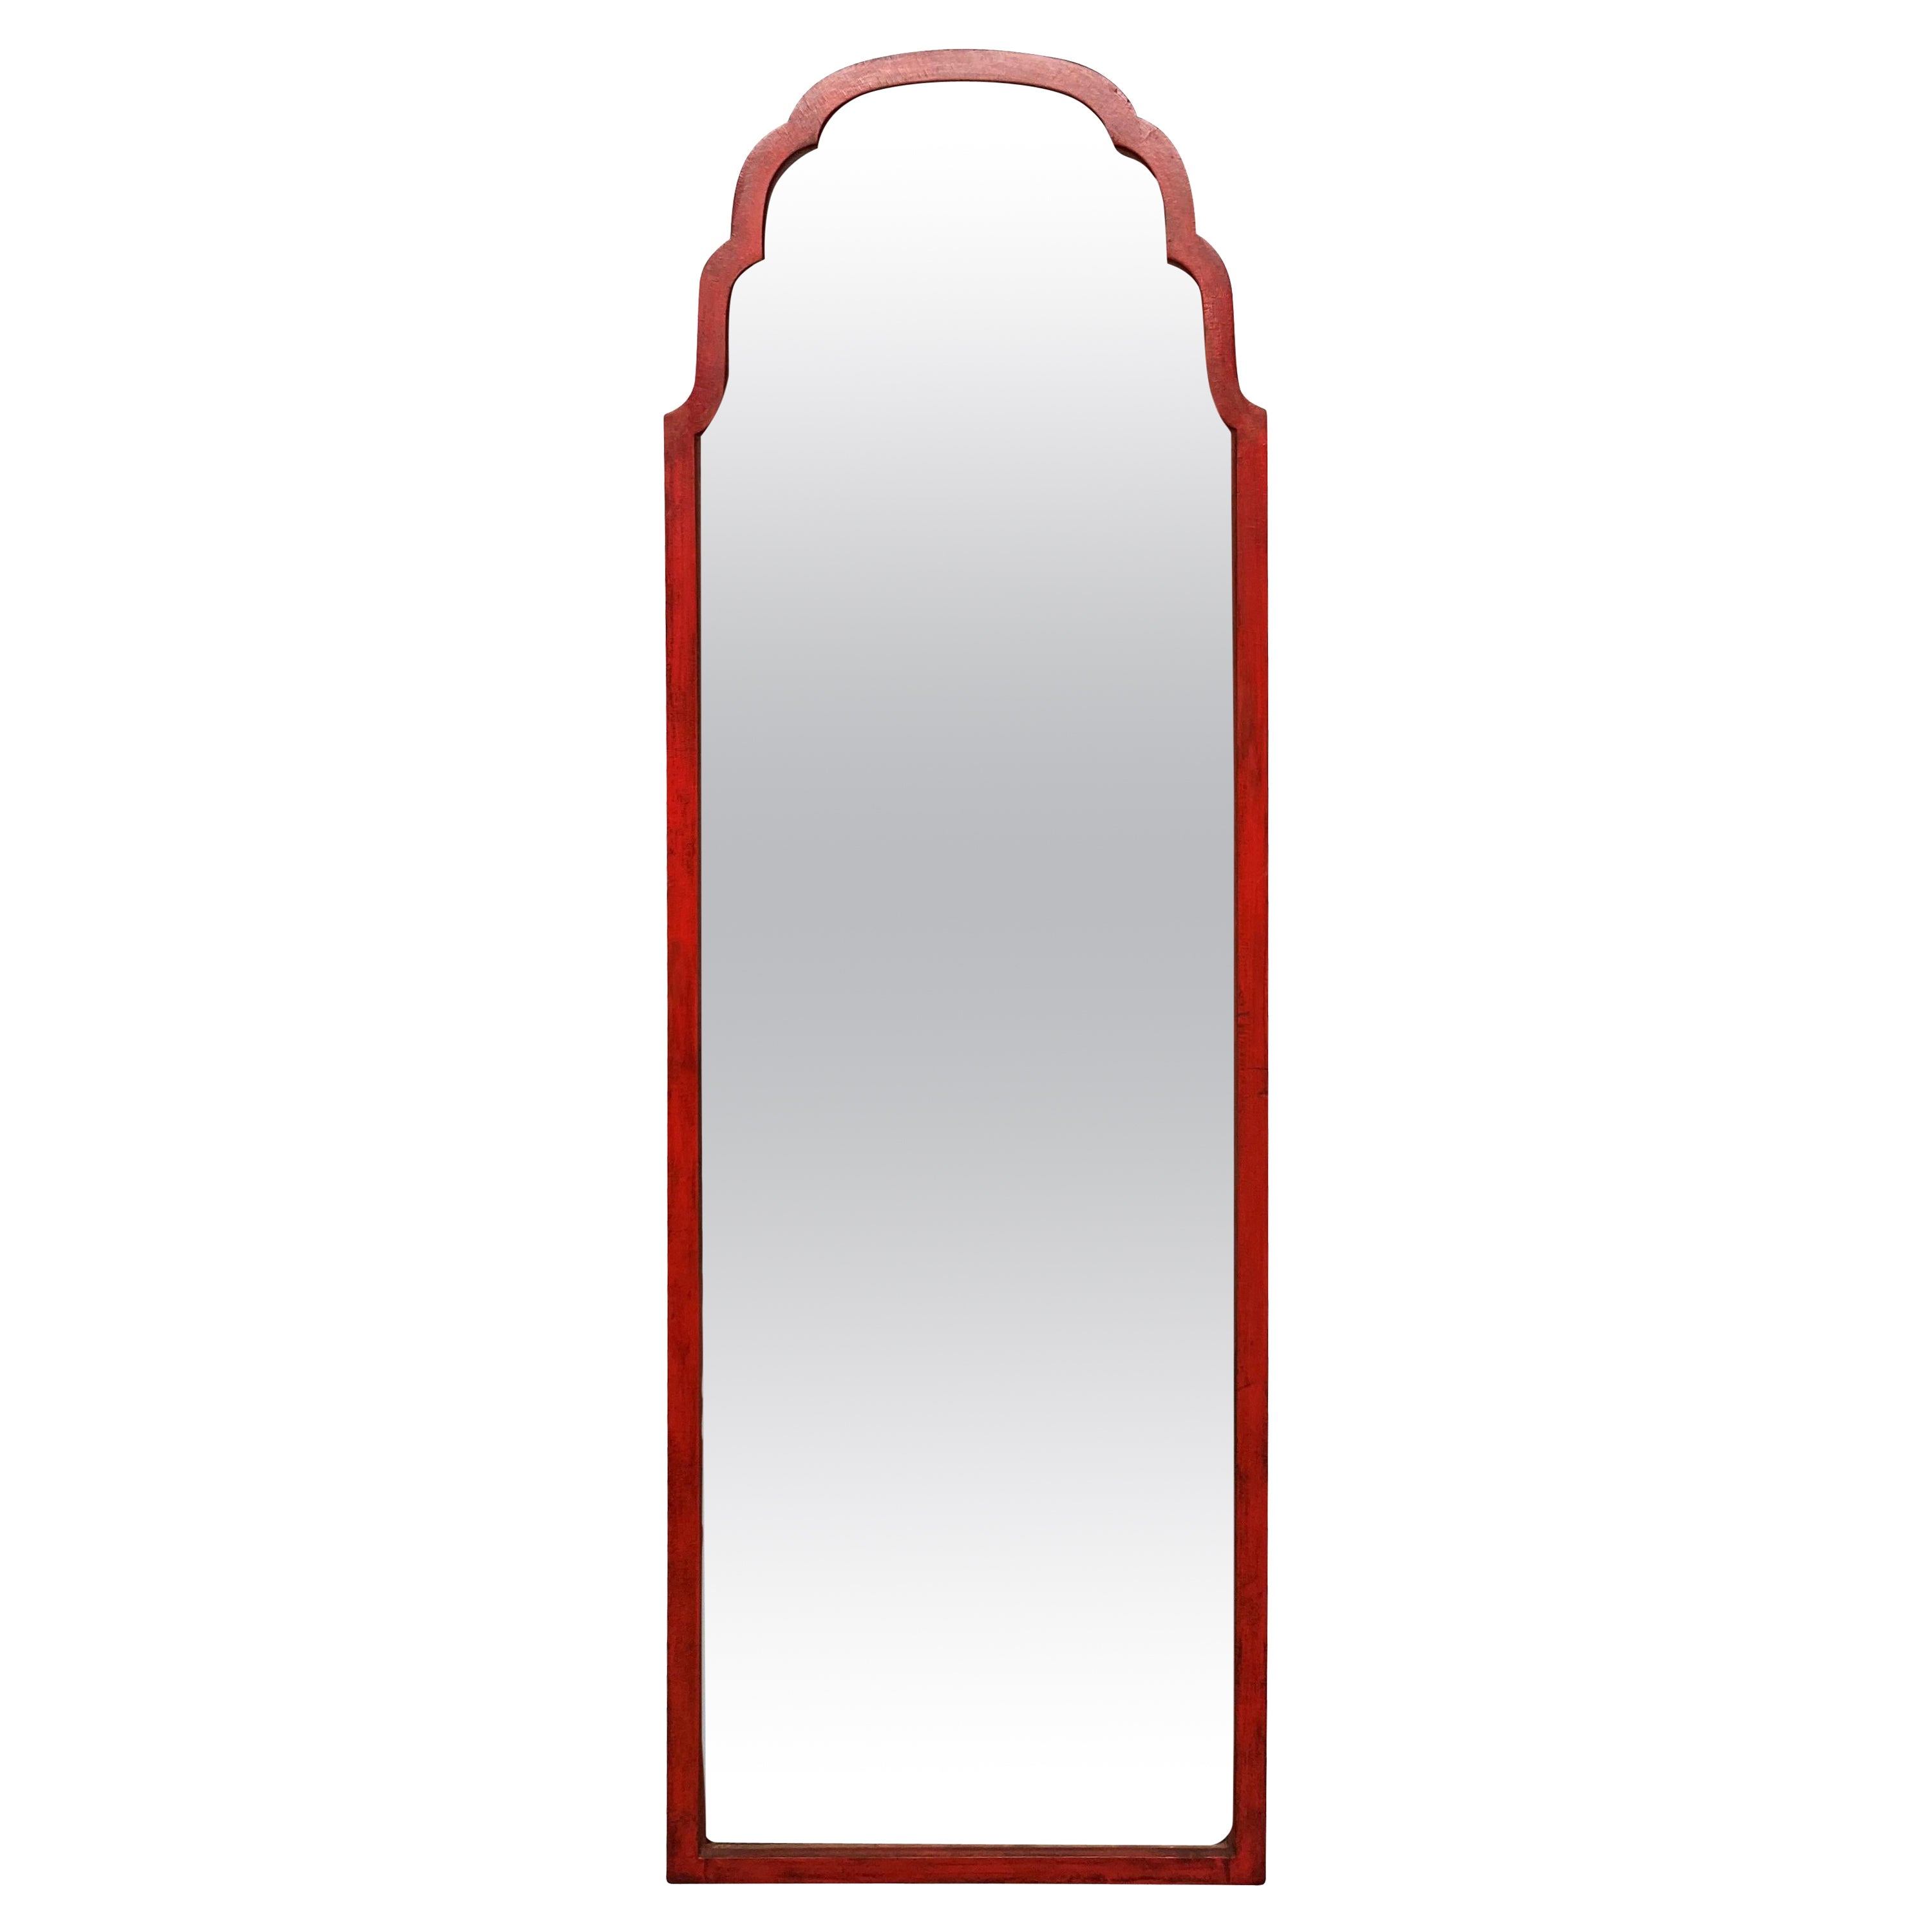 Red Lacquered Queen Anne Style Mirror